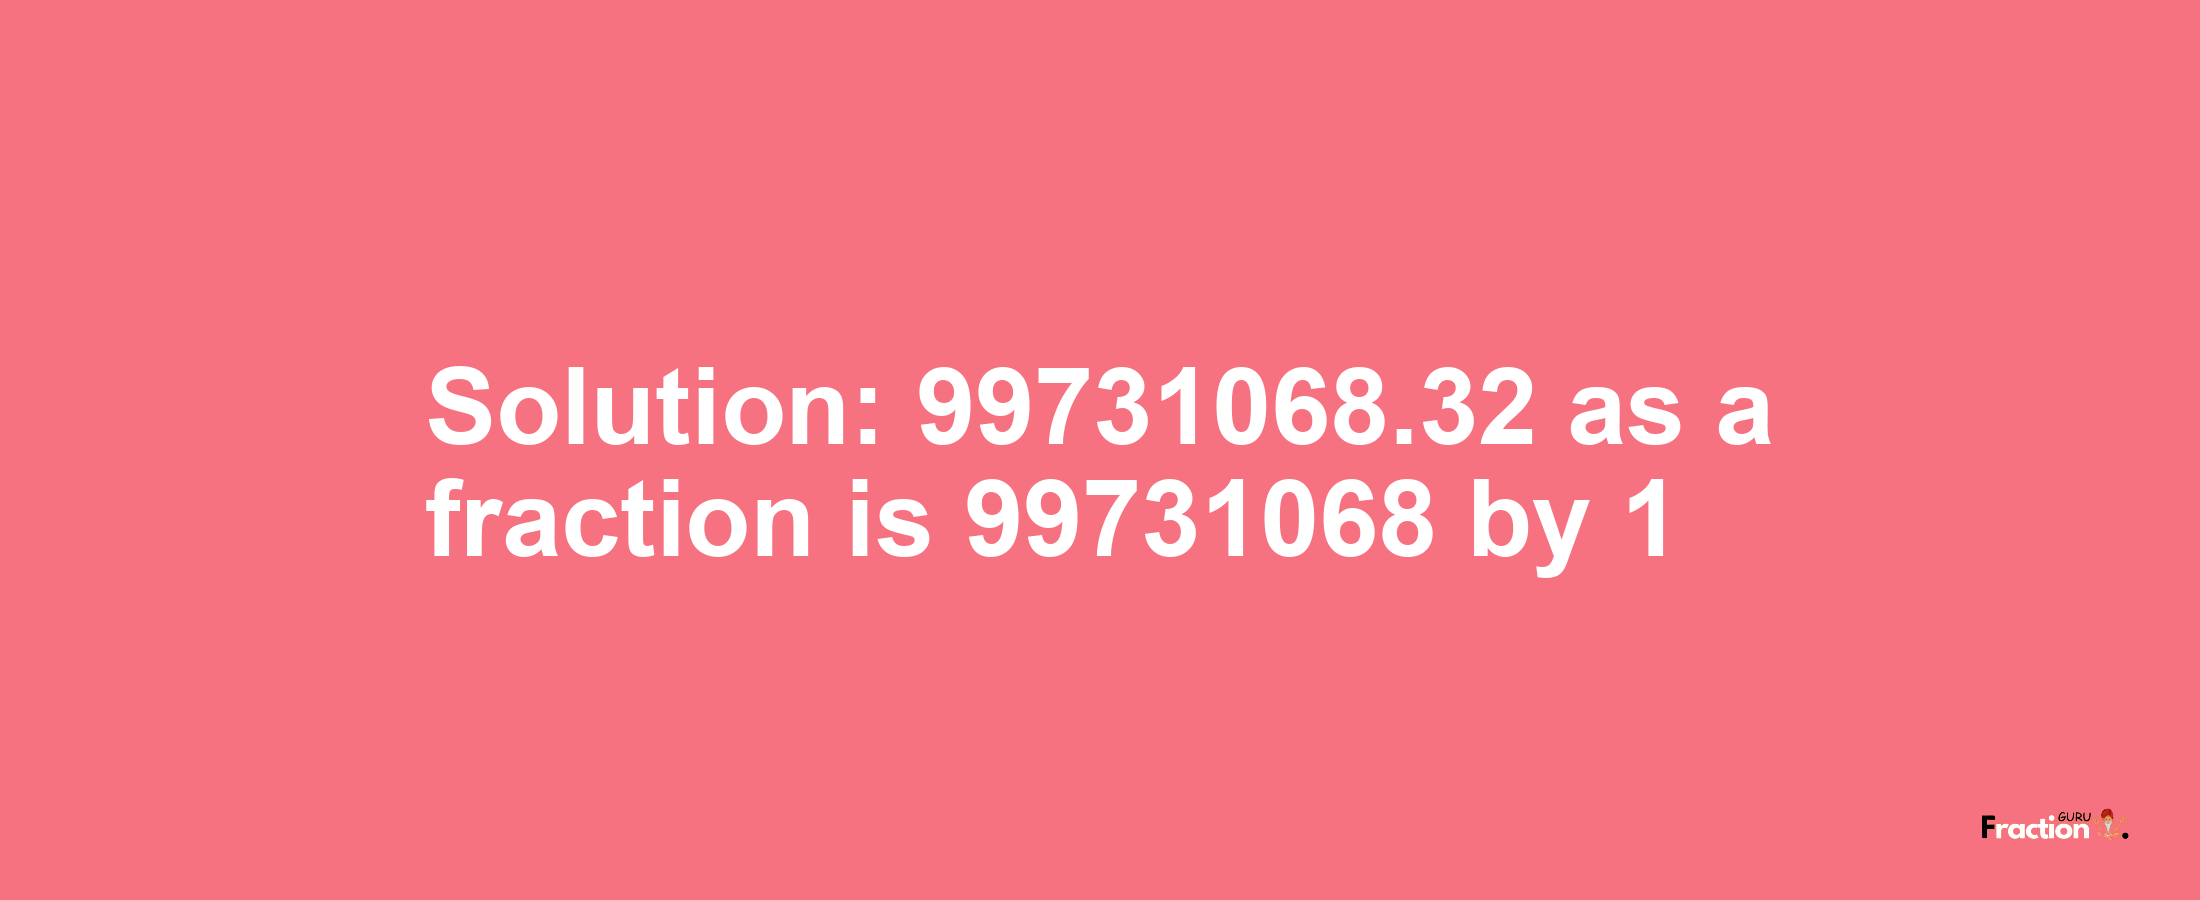 Solution:99731068.32 as a fraction is 99731068/1